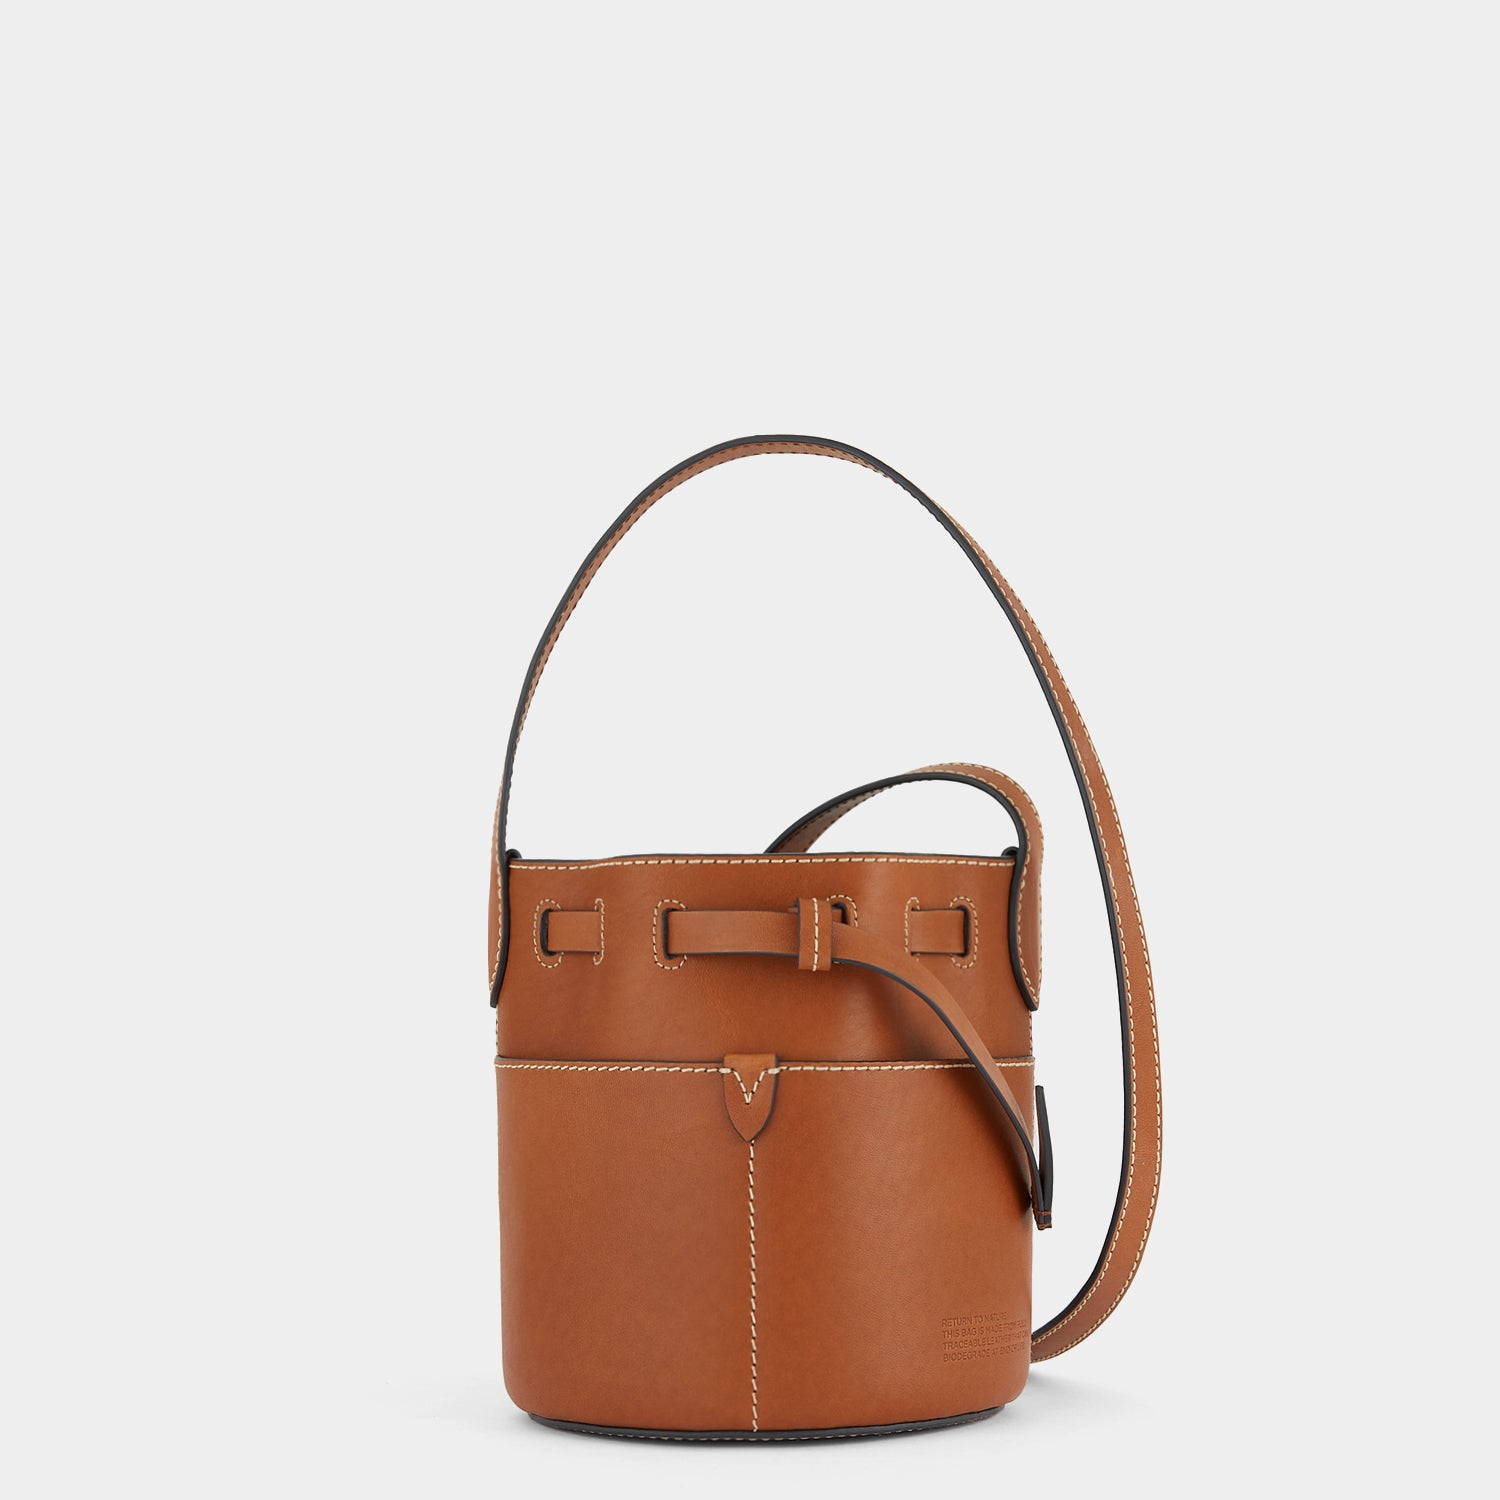 Return to Nature Mini Bucket Bag -

                  
                    Compostable Leather in Tan -
                  

                  Anya Hindmarch UK
